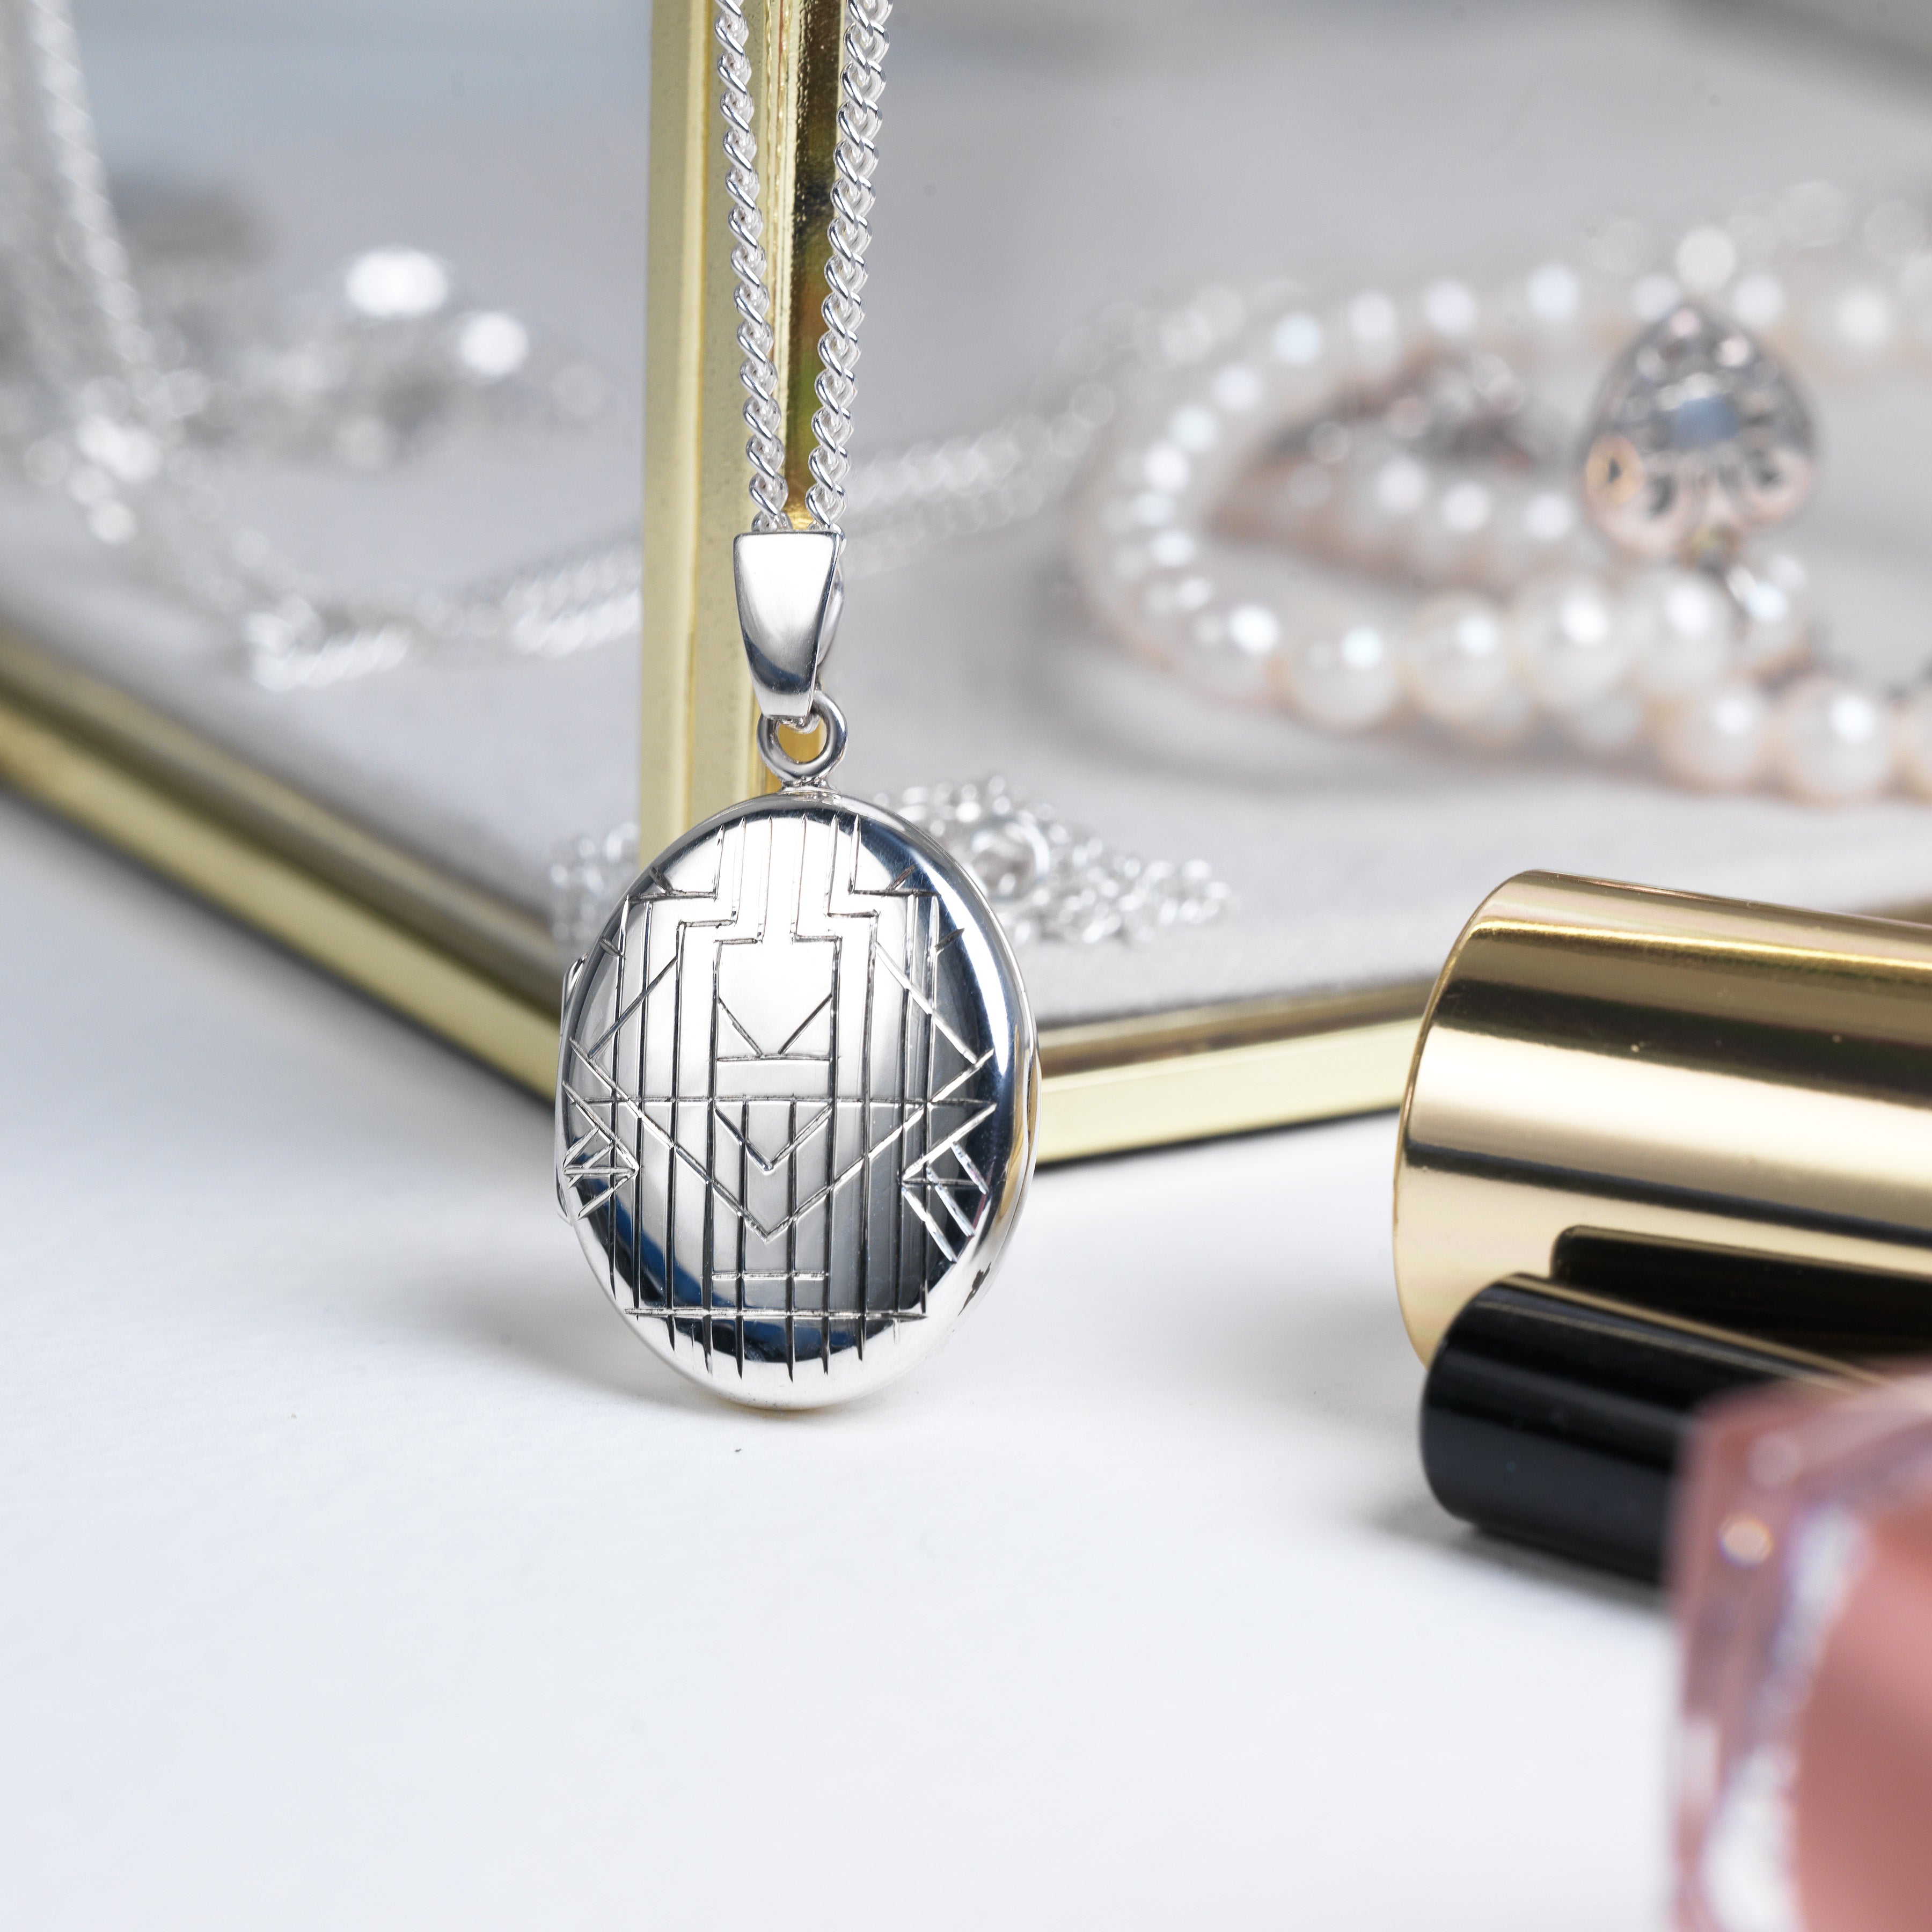 This is a stylized shot of a 925 sterling silver oval locket, hand engraved with an art deco chevron design on the front.